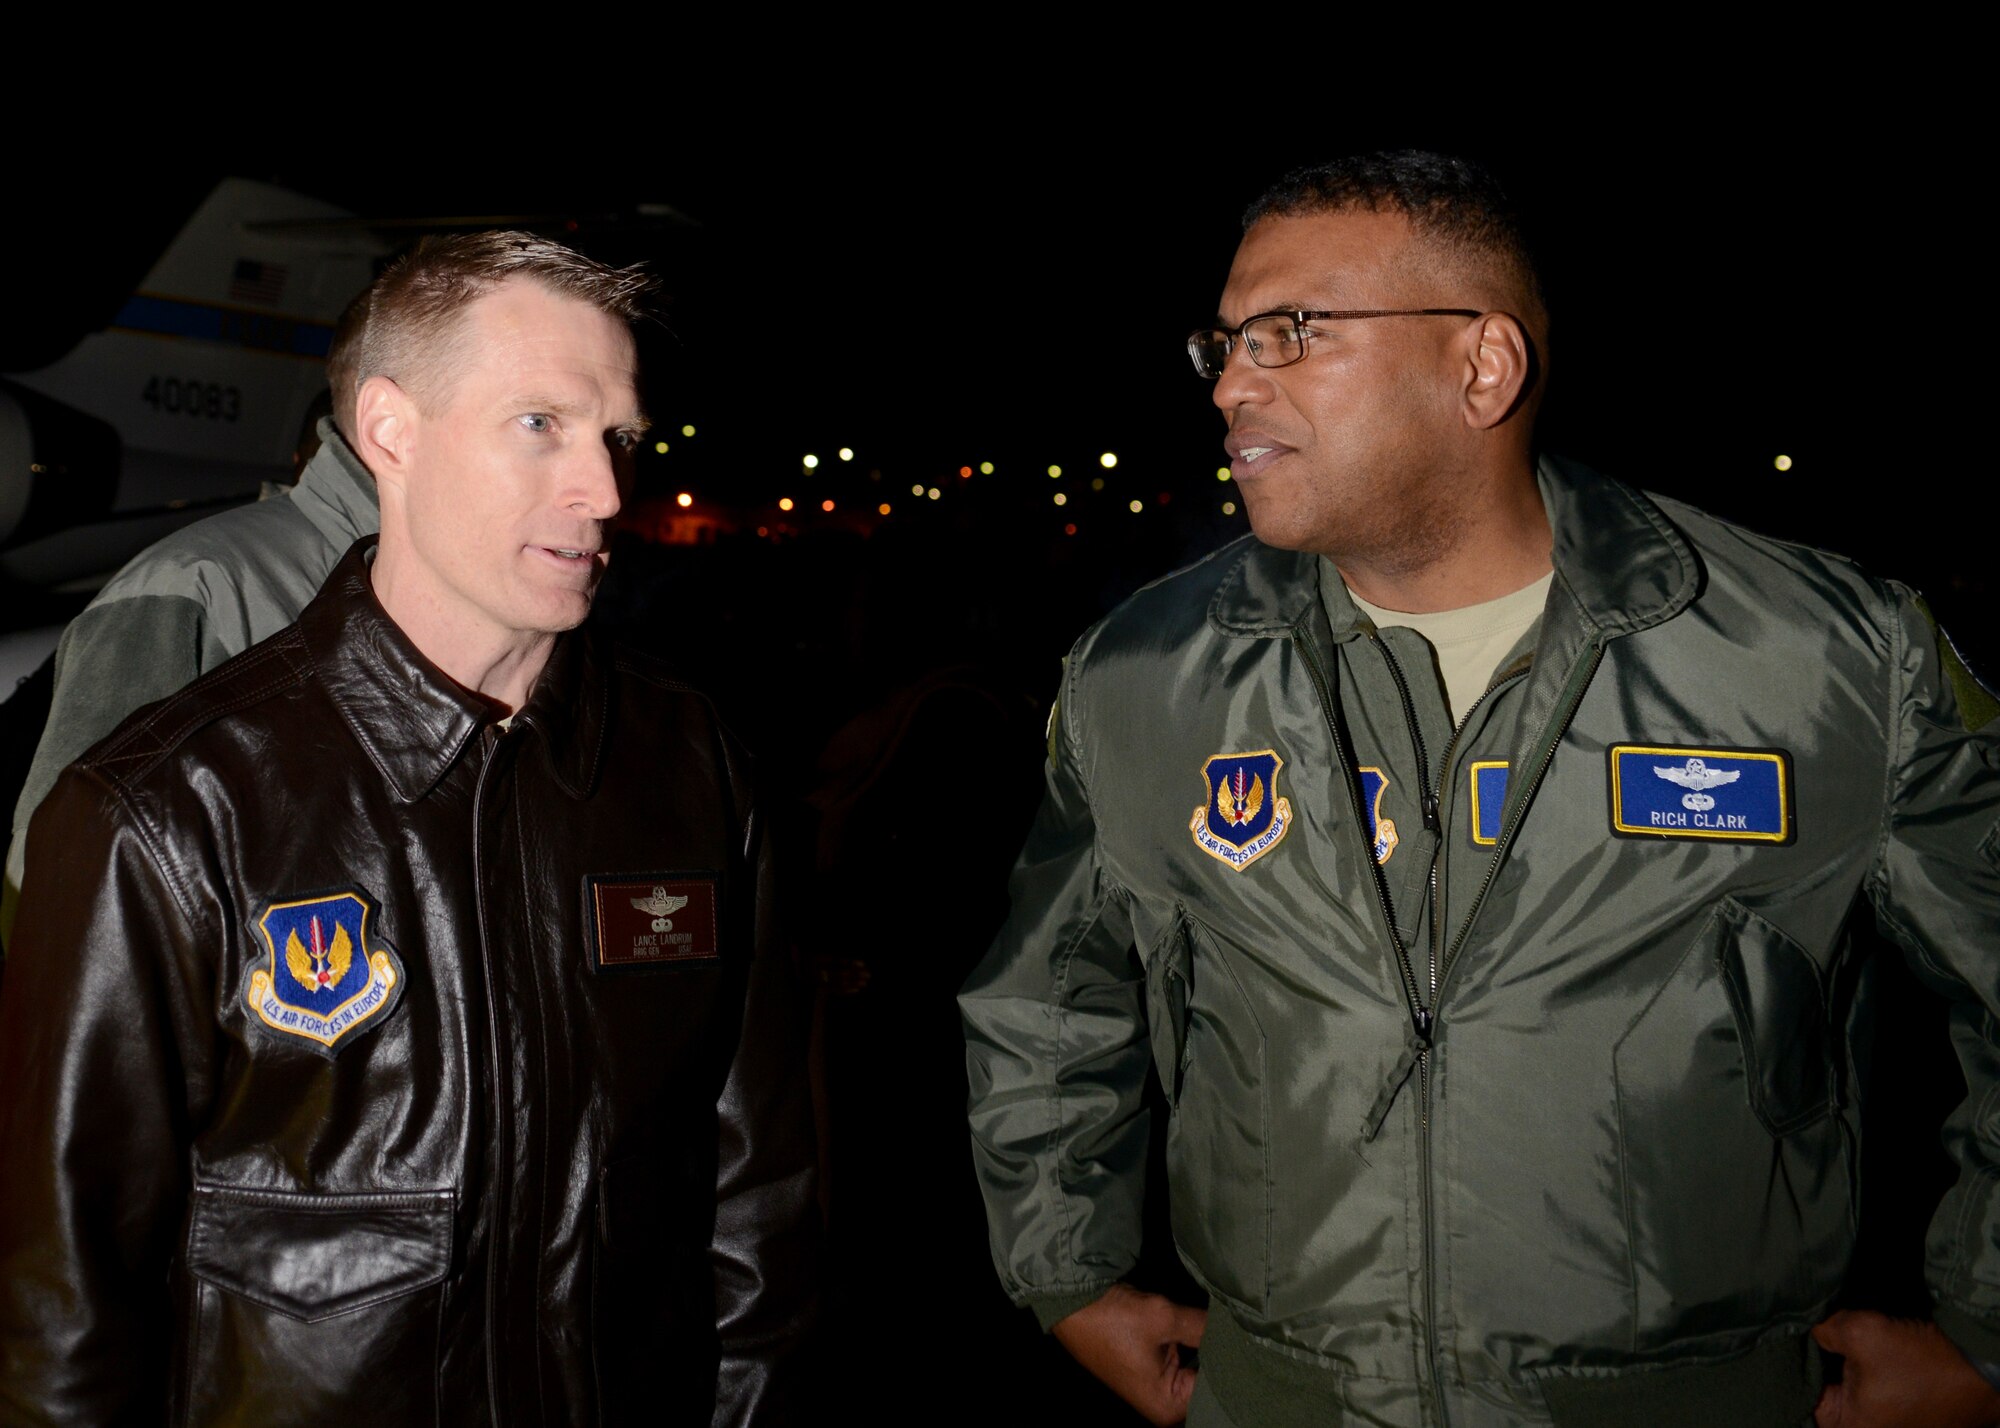 Brig. Gen. Lance Landrum, 31st Fighter Wing commander, meets Lt. Gen. Richard Clark, 3rd Air Force commander, during his arrival to Aviano Air Base, Italy on Nov. 29, 2016. Clark toured the base, met with Airmen and hosted an all call to thank Team Aviano for their hard work and dedication to the mission. (U.S. Air Force photo by Senior Airman Austin Harvill)